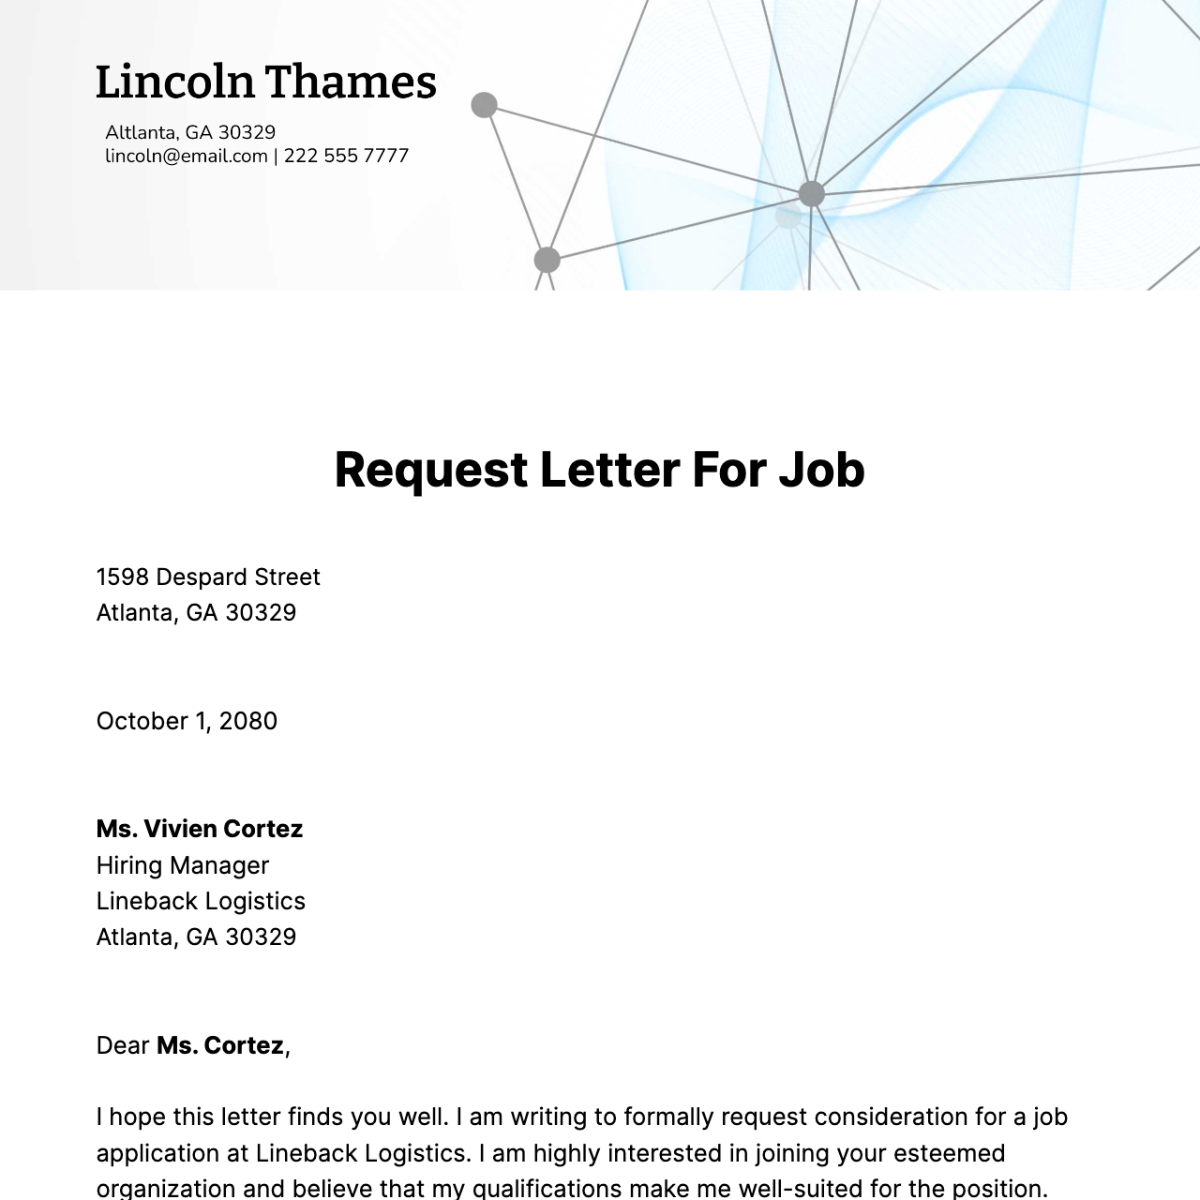 Request Letter for Job  Template